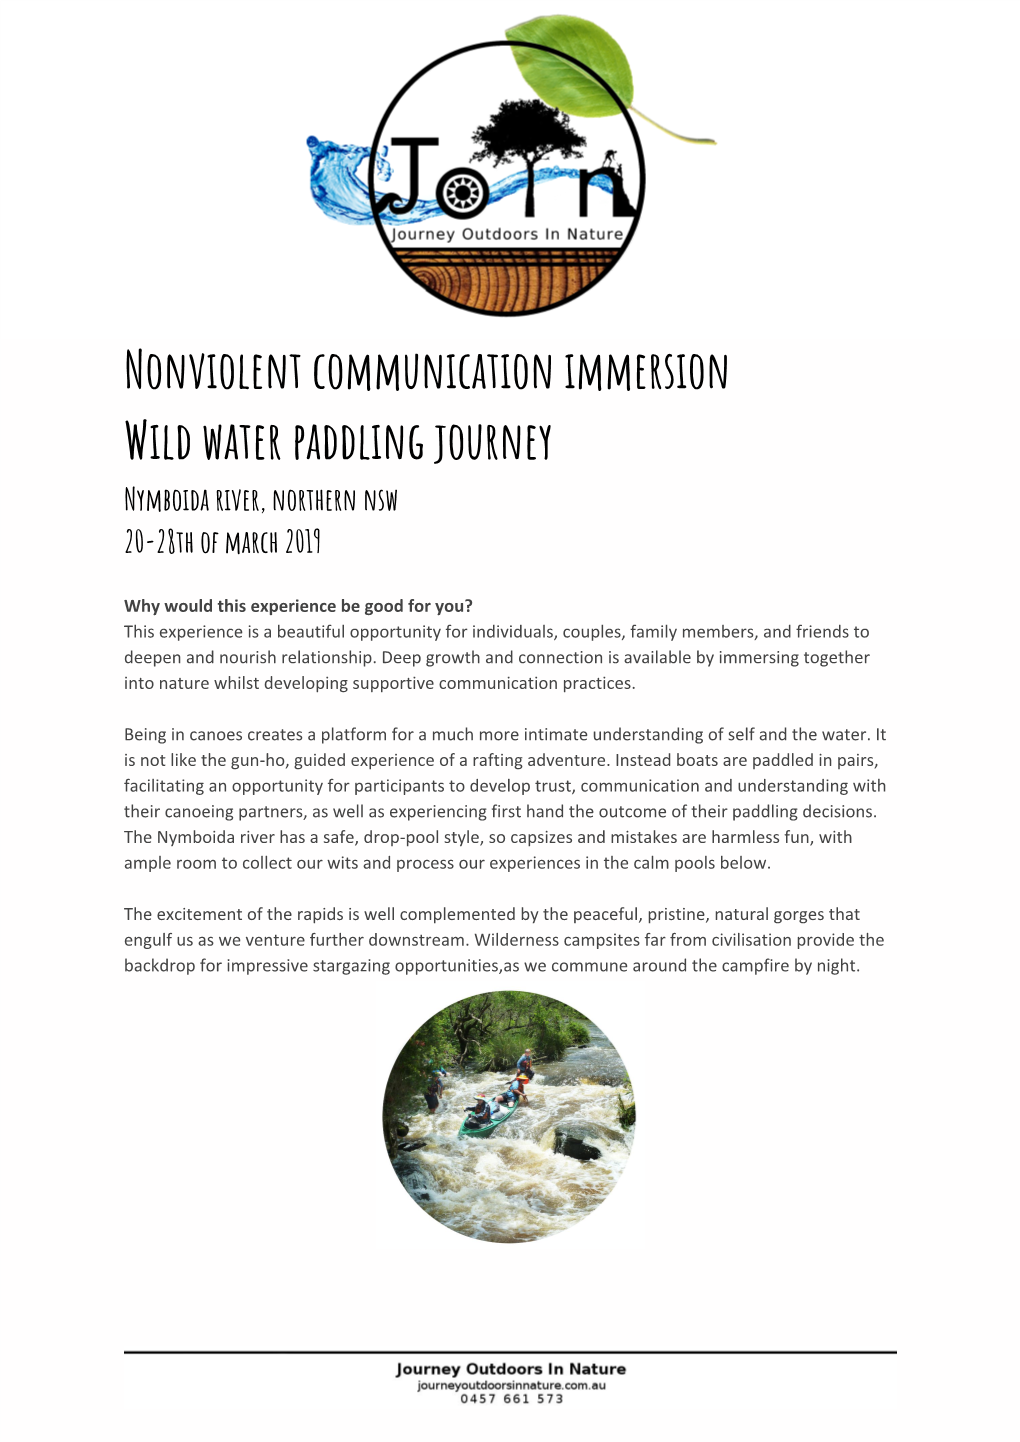 Nonviolent Communication Immersion Wild Water Paddling Journey Nymboida River, Northern Nsw 20-28Th of March 2019